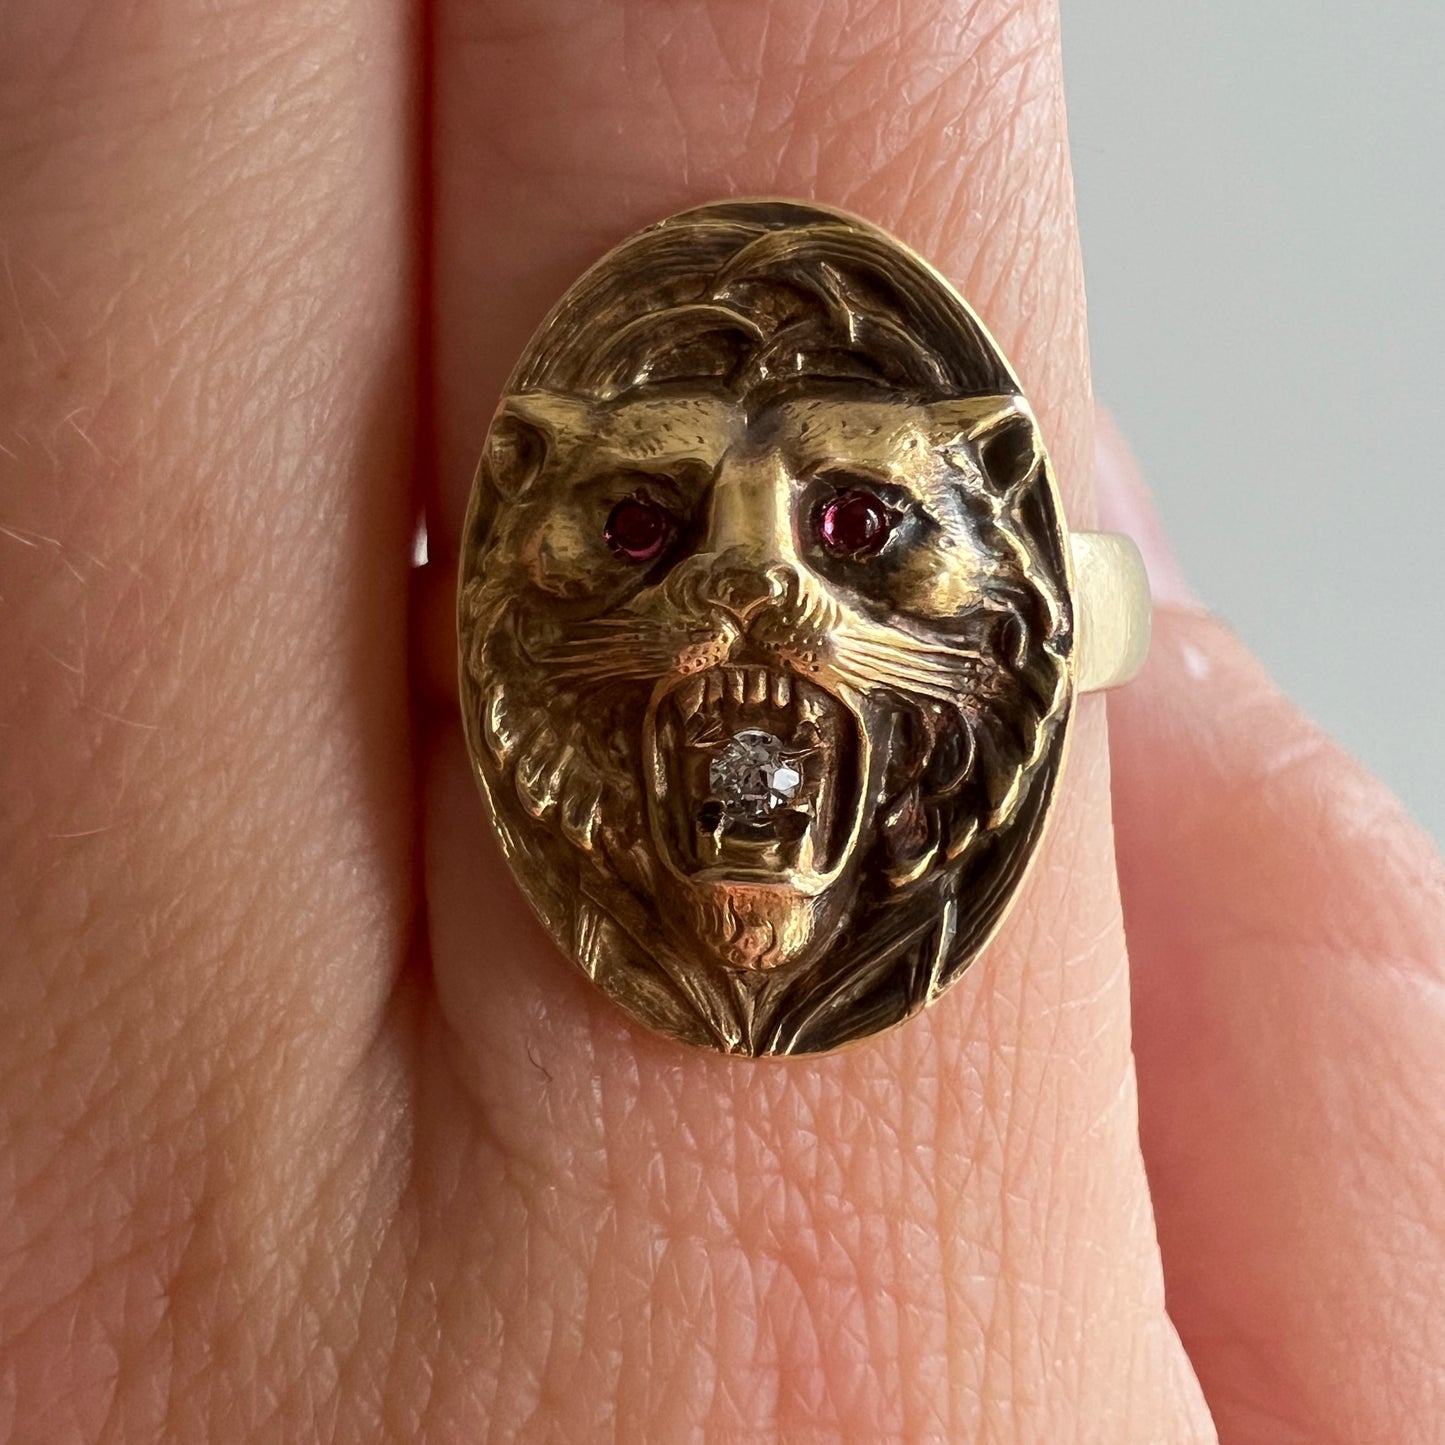 reimagined V I N T A G E // ambiguous big cat / solid 10k yellow gold art nouveau cufflink conversion ring / size 7.25 ish